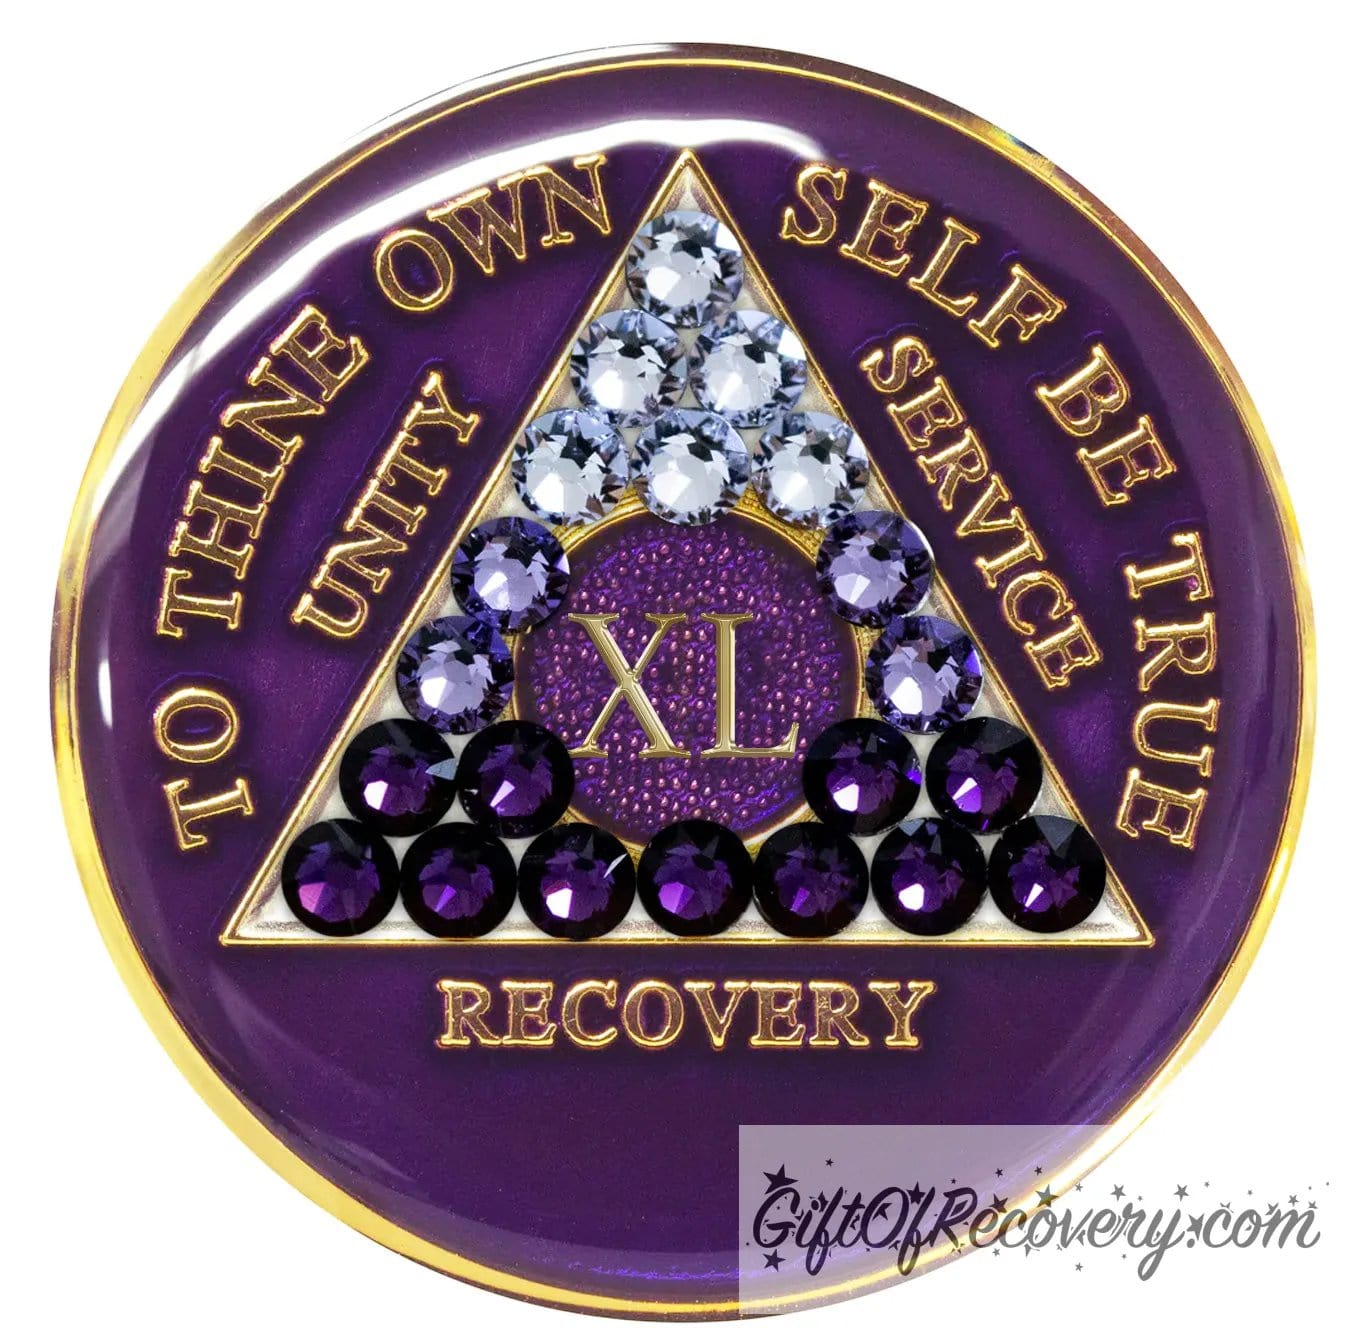 40 year Amethyst purple AA medallion with 21 genuine crystals ranging from light to dark for symbolism of transition, the triangle, circle, roman numeral, unity, recovery, service, and to thine own self be true, are embossed with 14k gold, while the middle of the circle with the roman numeral is purple glitter, the recovery medallion is sealed with resin for a glossy finish. 